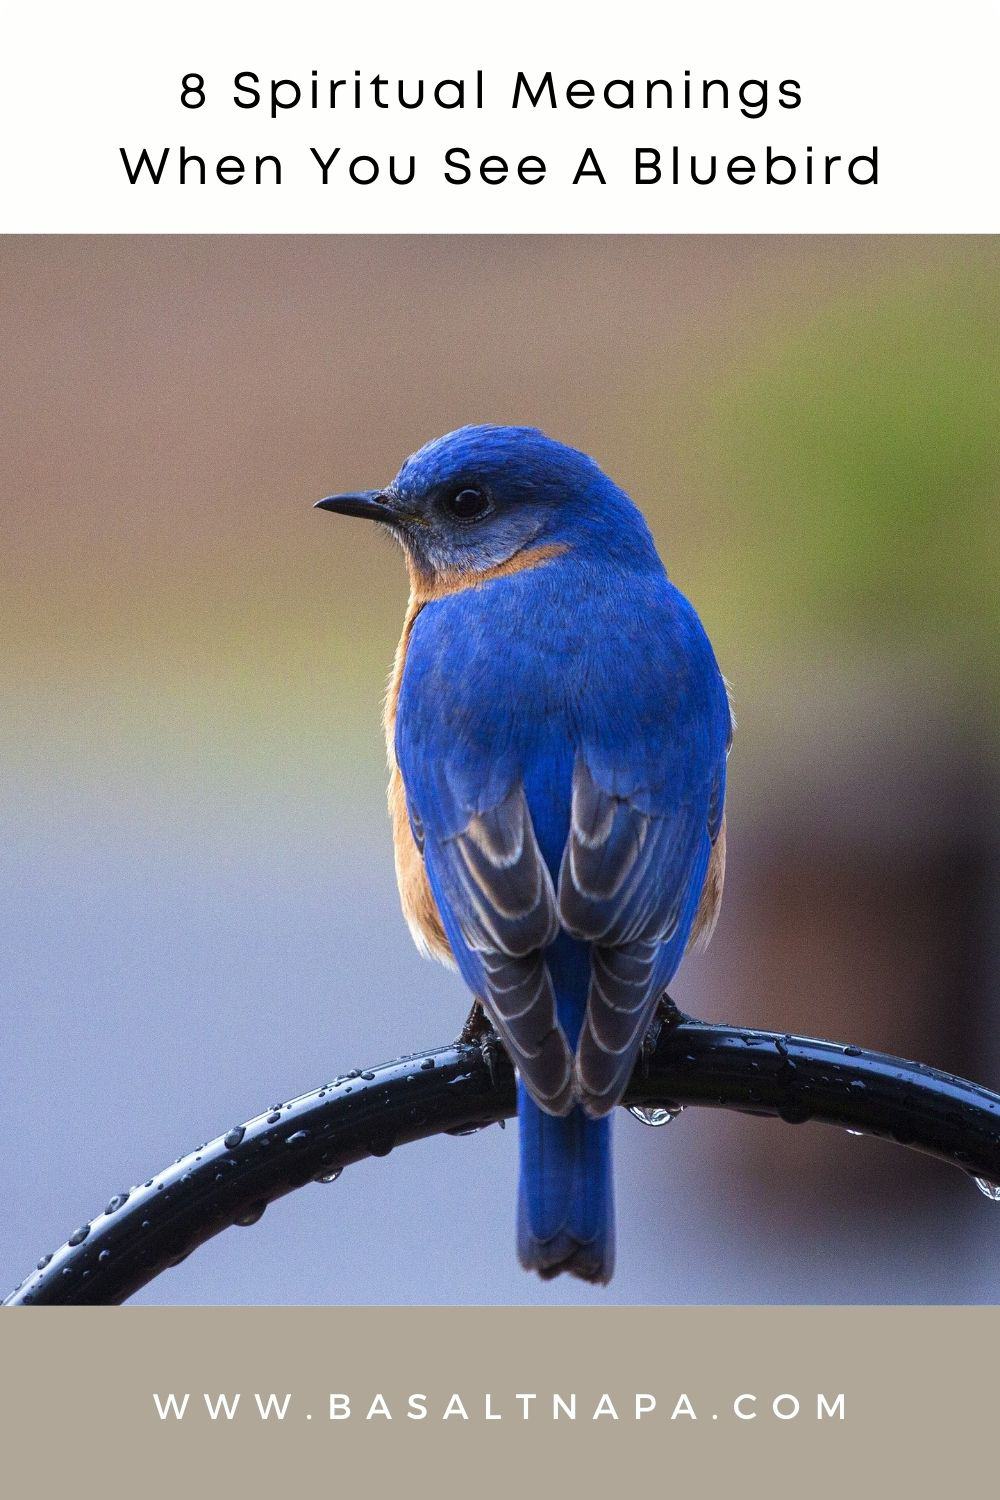 8 Spiritual Meanings When You See A Bluebird